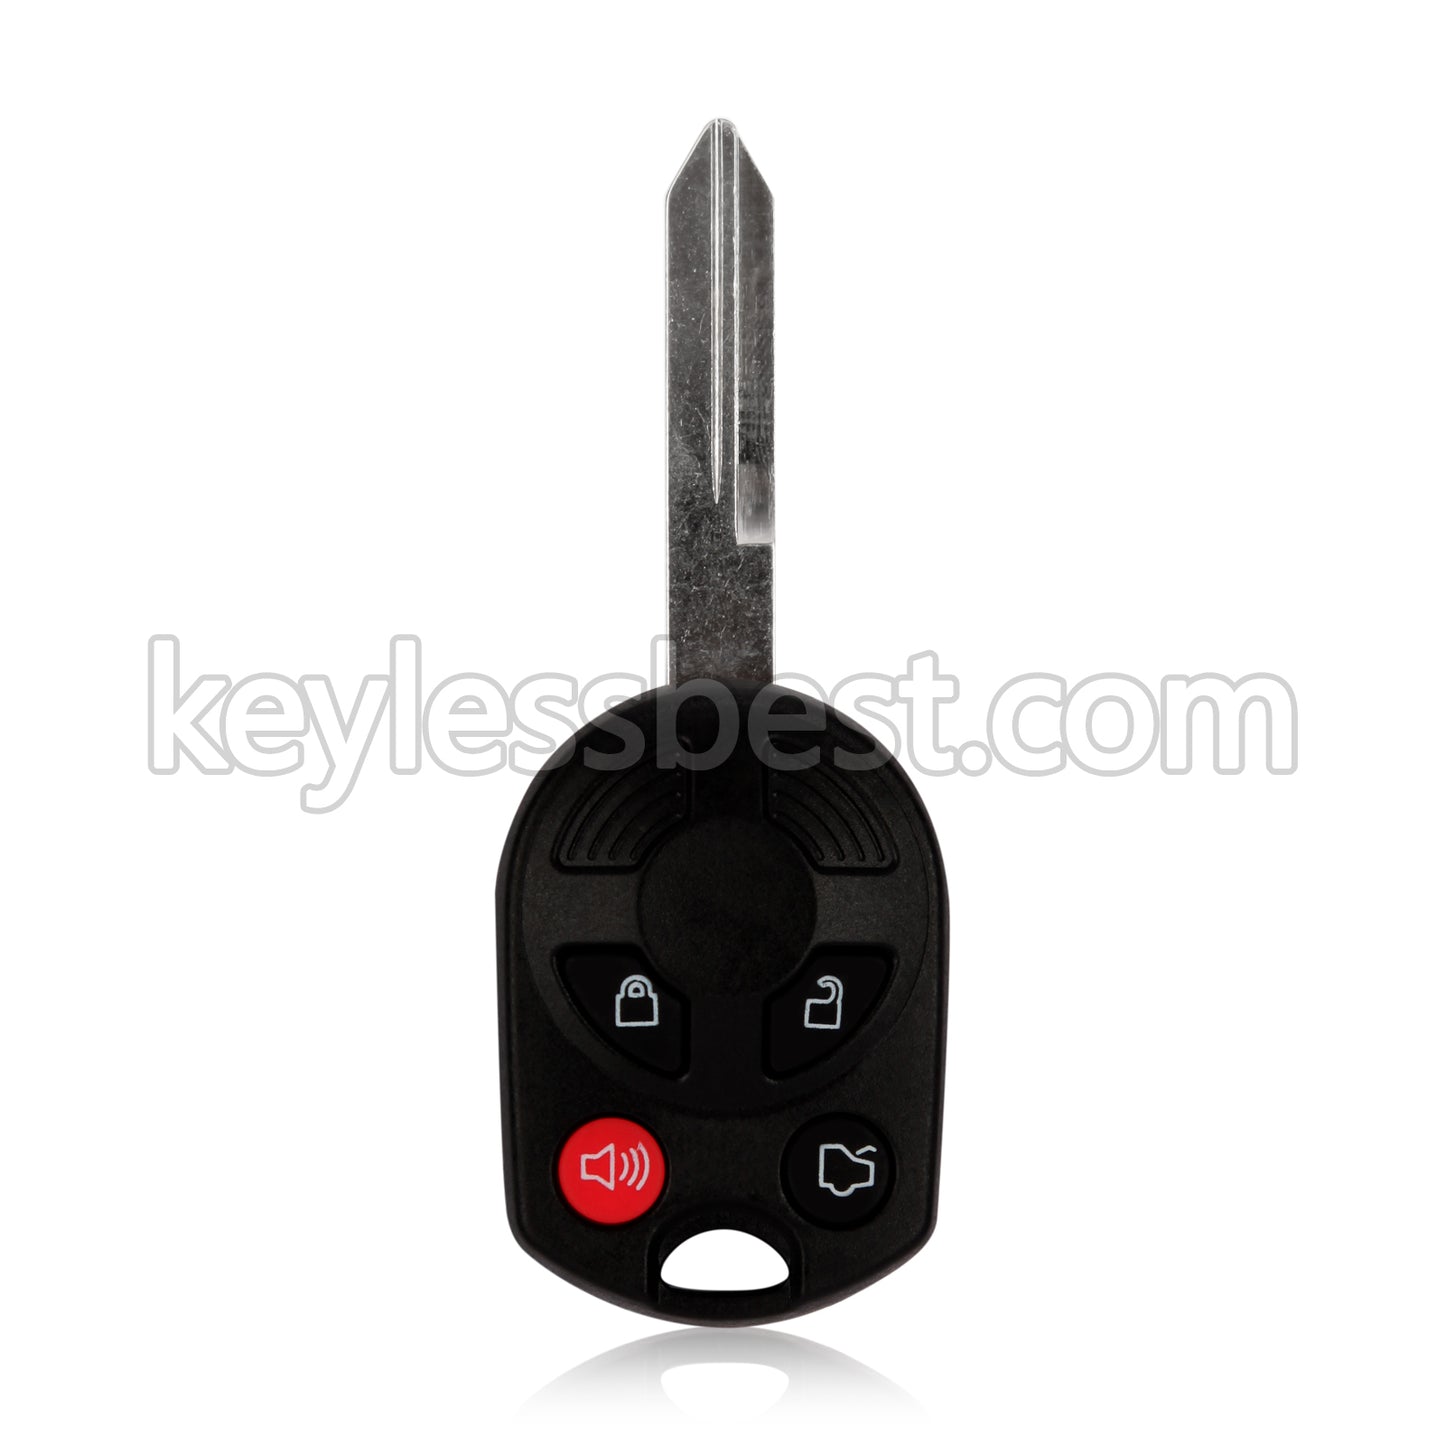 2005-2012 Ford Lincoln Mazda Mercury / 4 Button Remote Key / OUCD6000022 / 315MHz